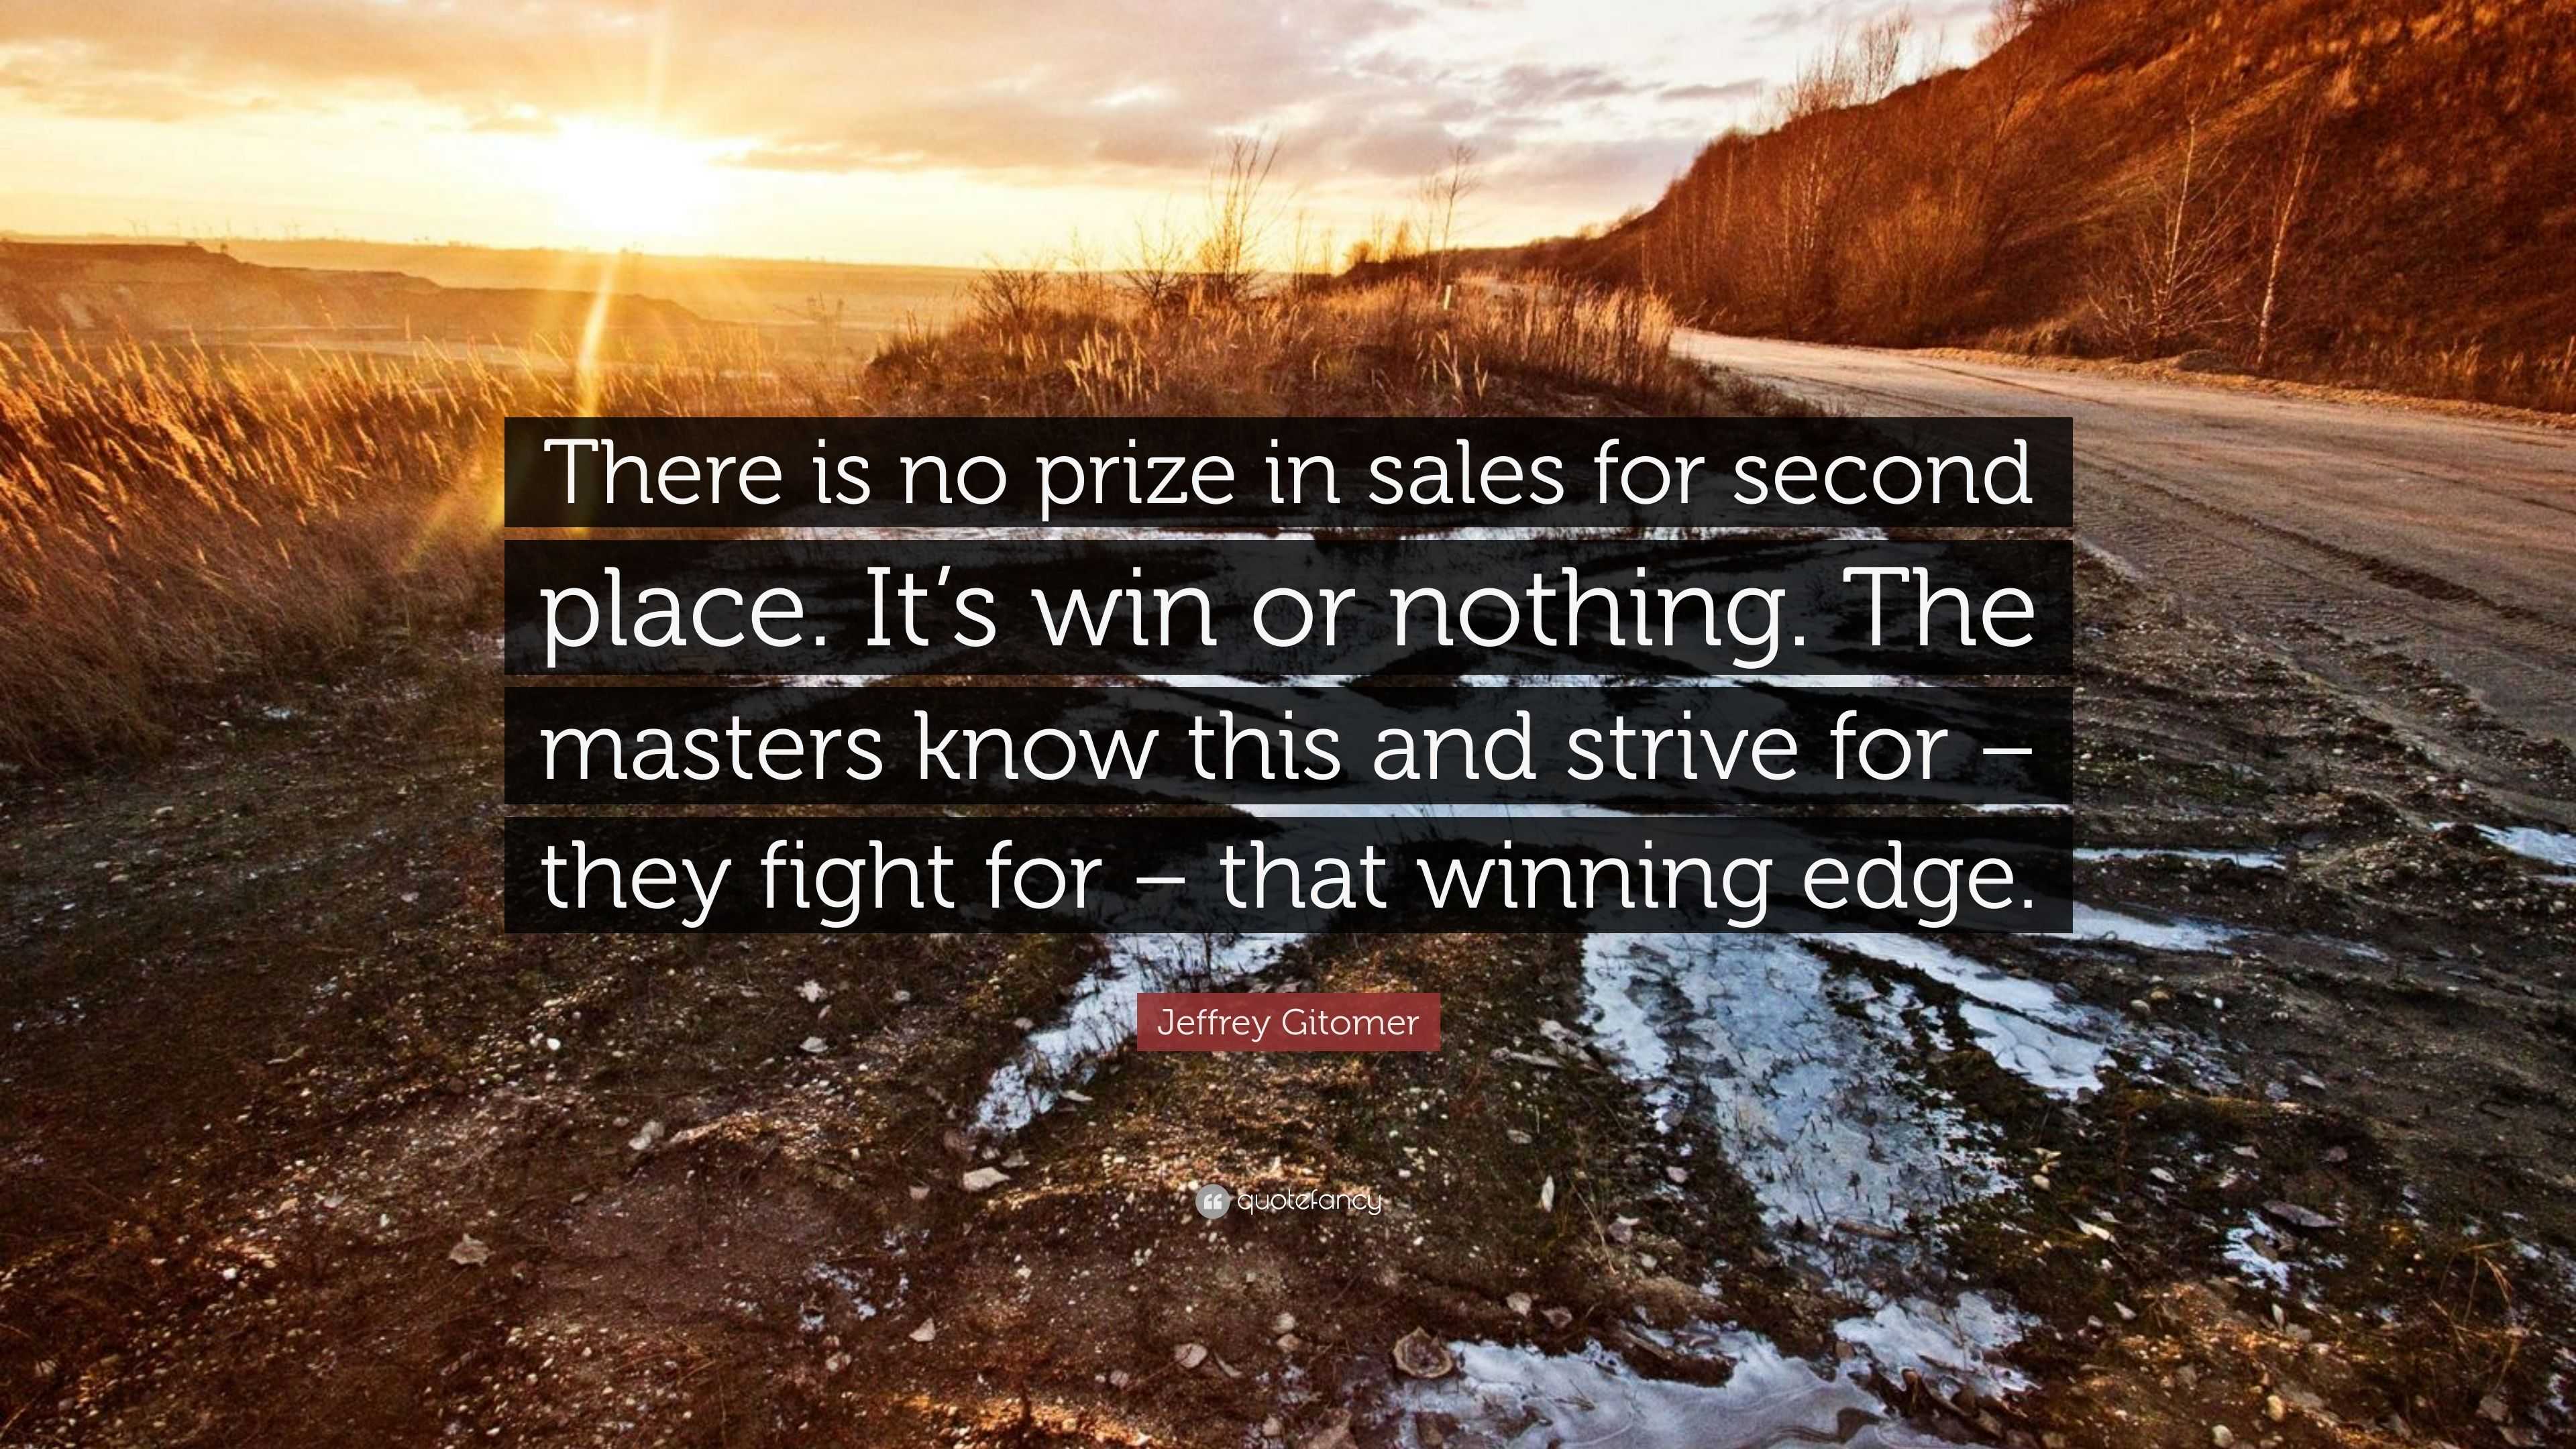 Jeffrey Gitomer Quote There Is No Prize In Sales For Second Place It S Win Or Nothing The Masters Know This And Strive For They Fight For